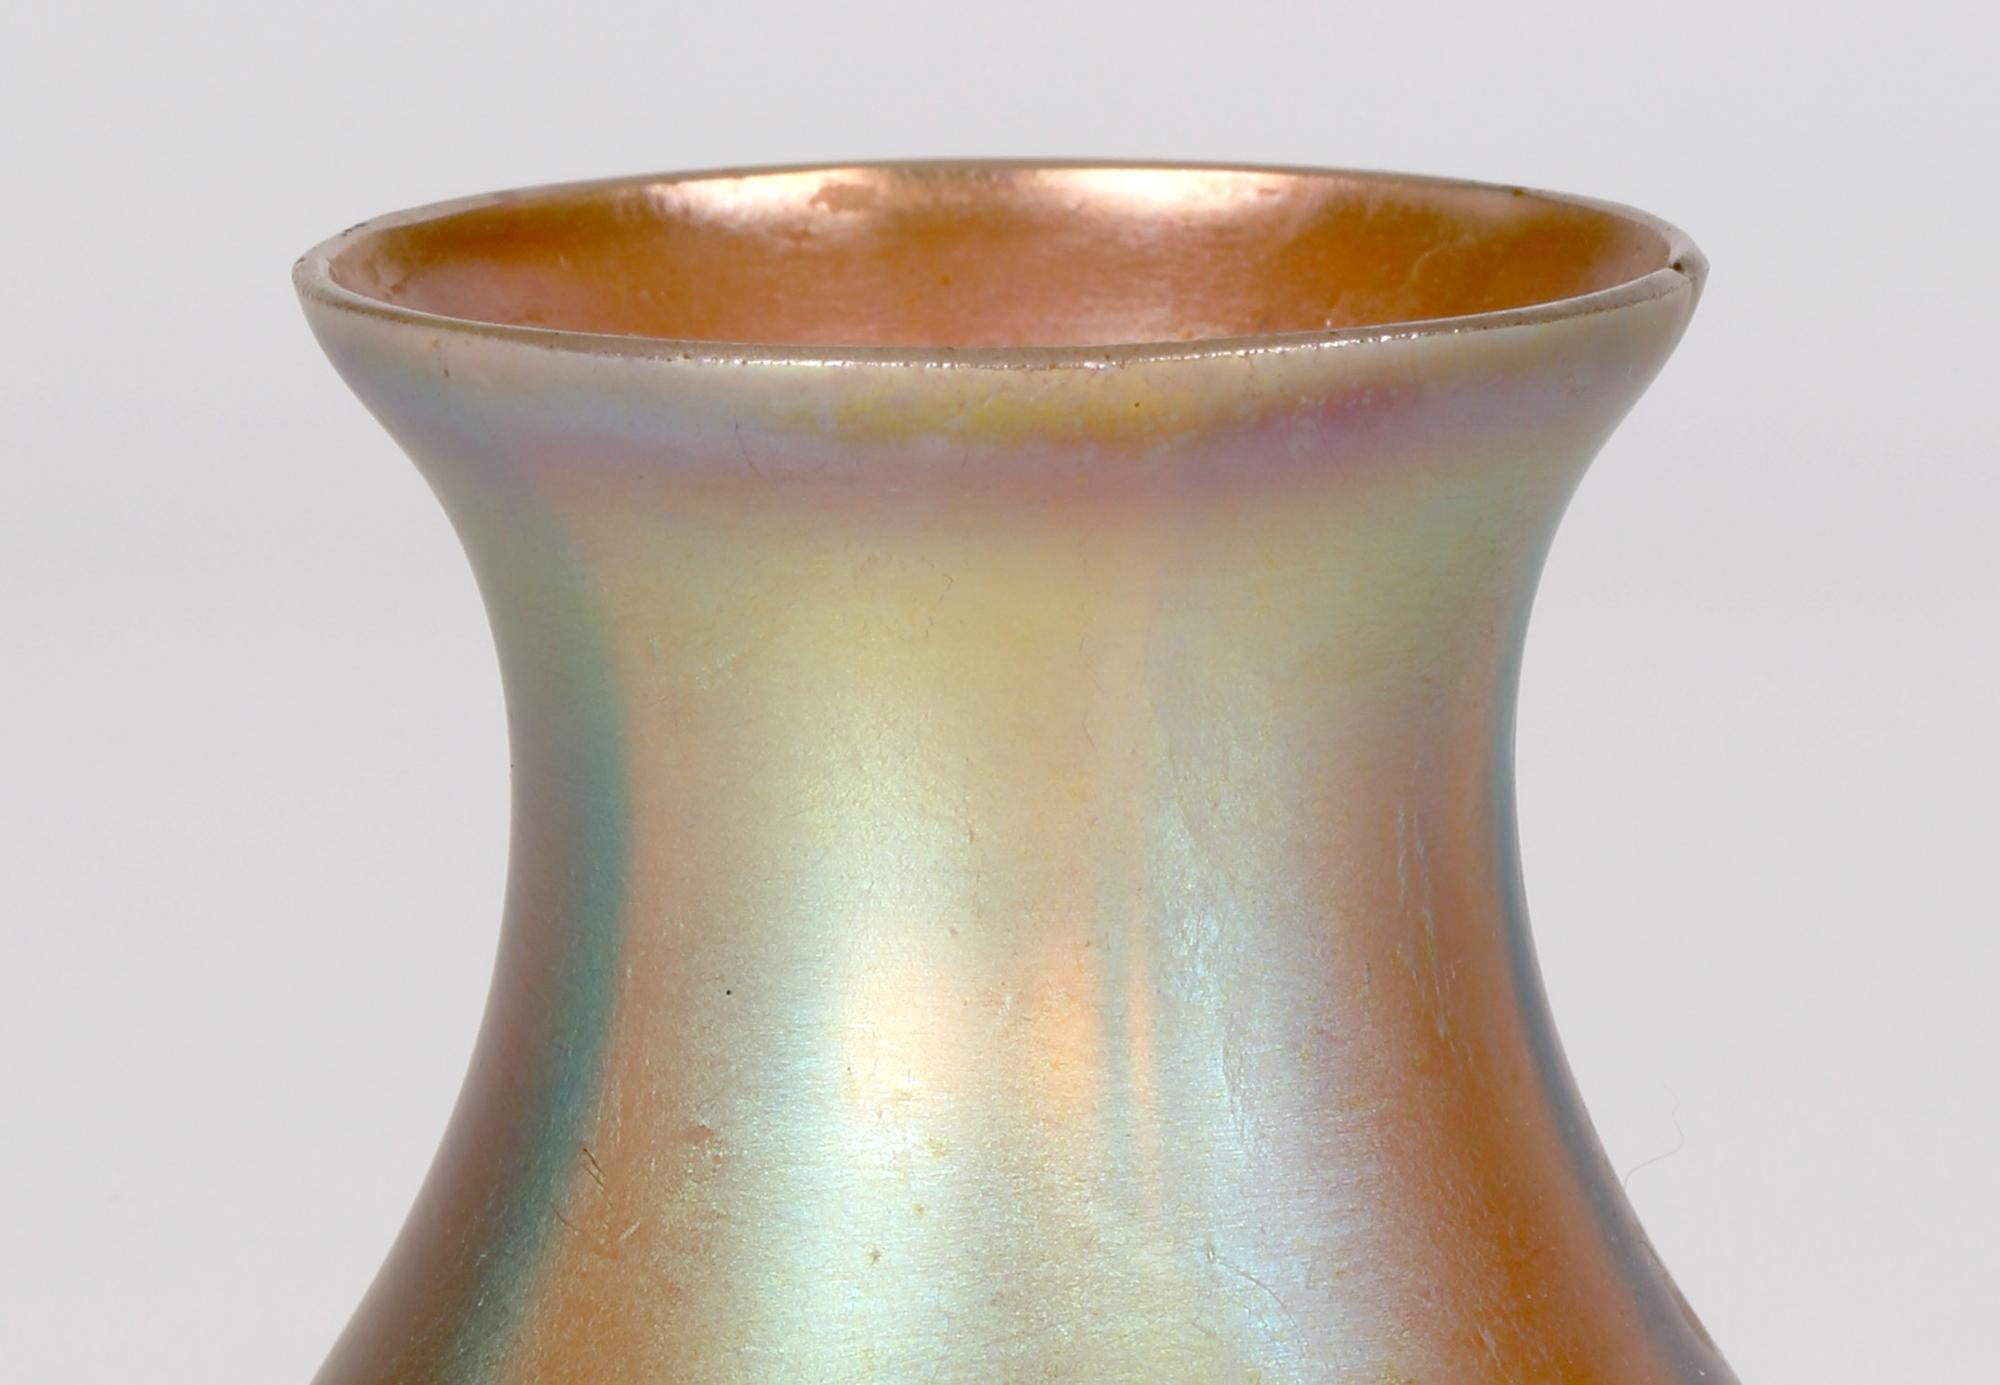 Finely made German Art Deco Myra Kristal miniature iridescent art glass vase by Karl Wiedmann for WMF (Würtemburgische Metallwaren Fabrik) and made between 1926 and 1936. This elegant amber glass vase has a narrow round foot with a bulbous tear drop